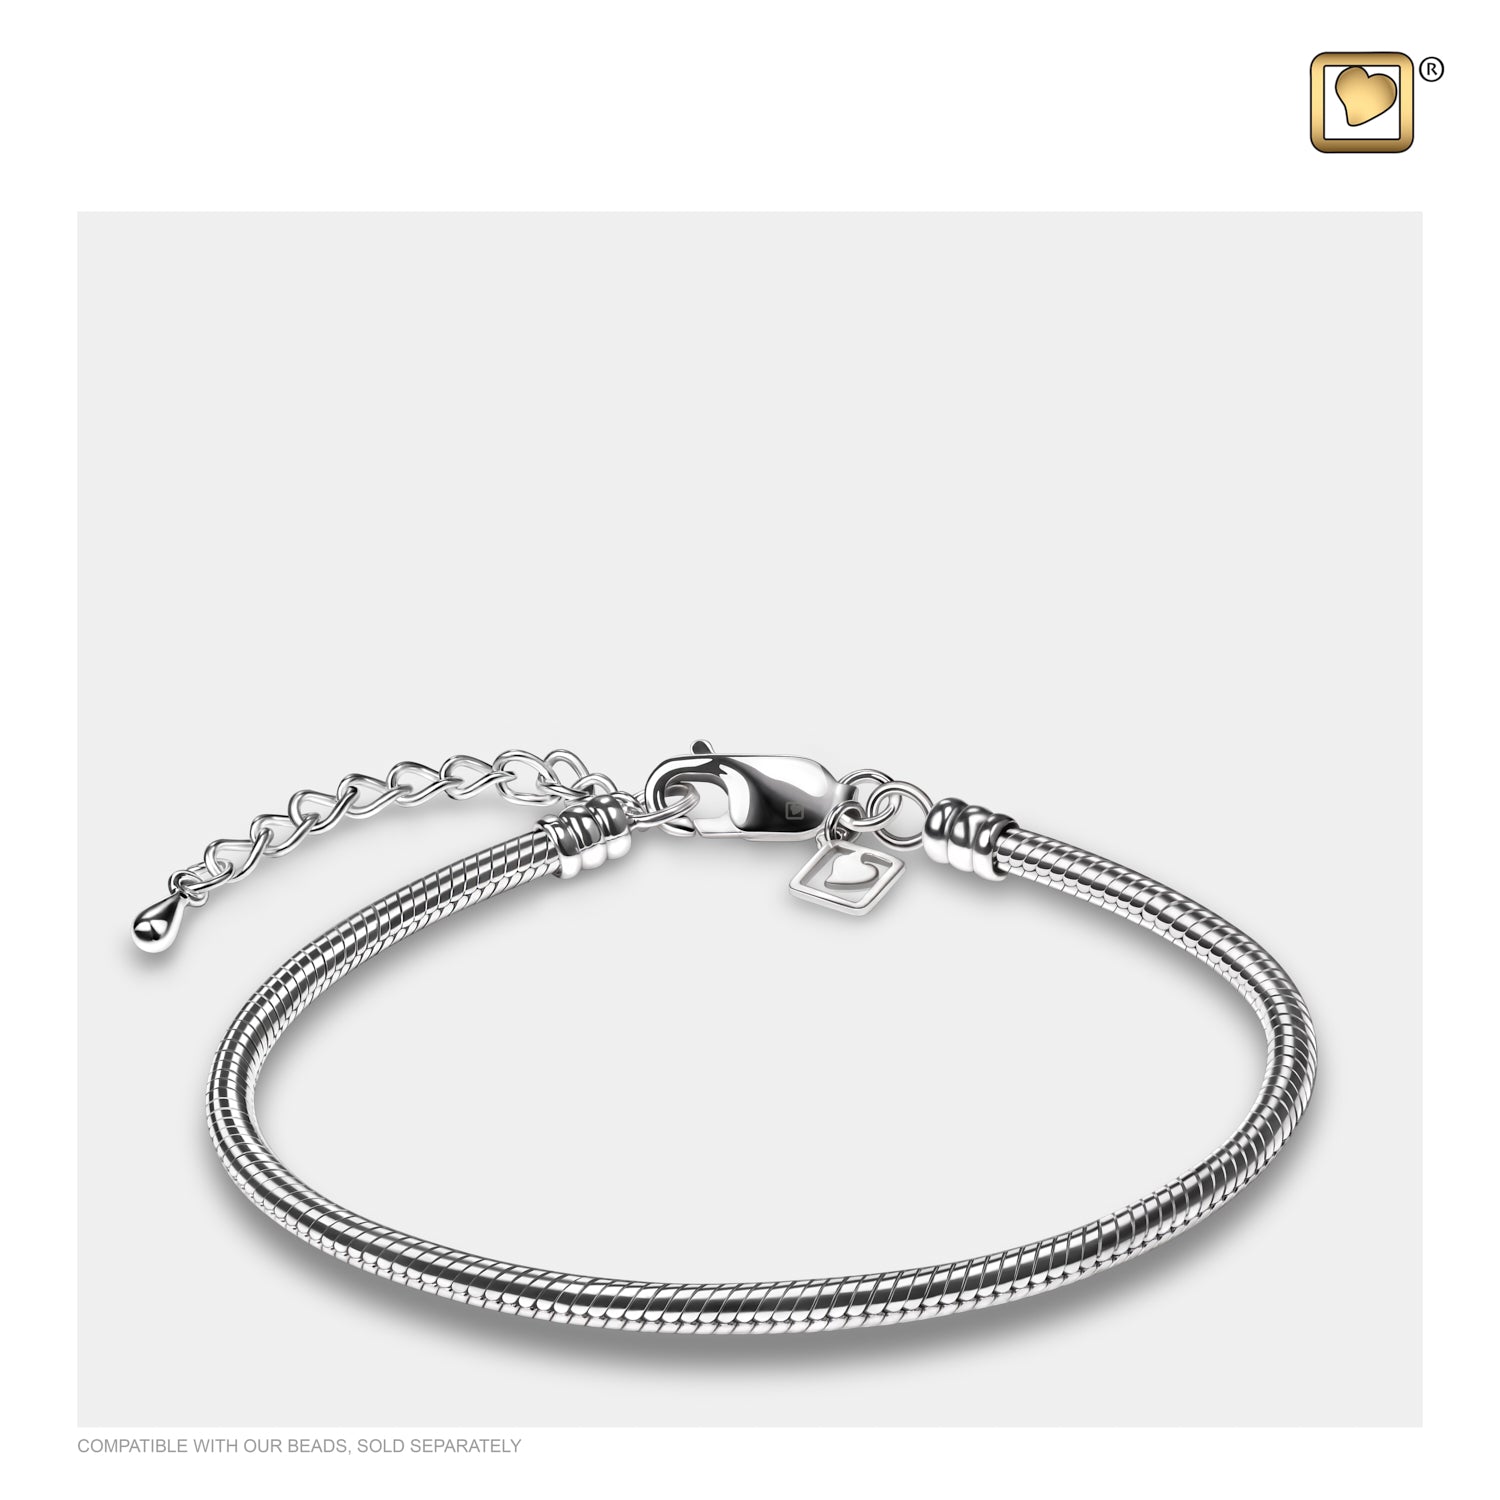 925 Sterling Silver Cremation Jewelry Bracelet with hanging link pendant & a heart shaped pendant